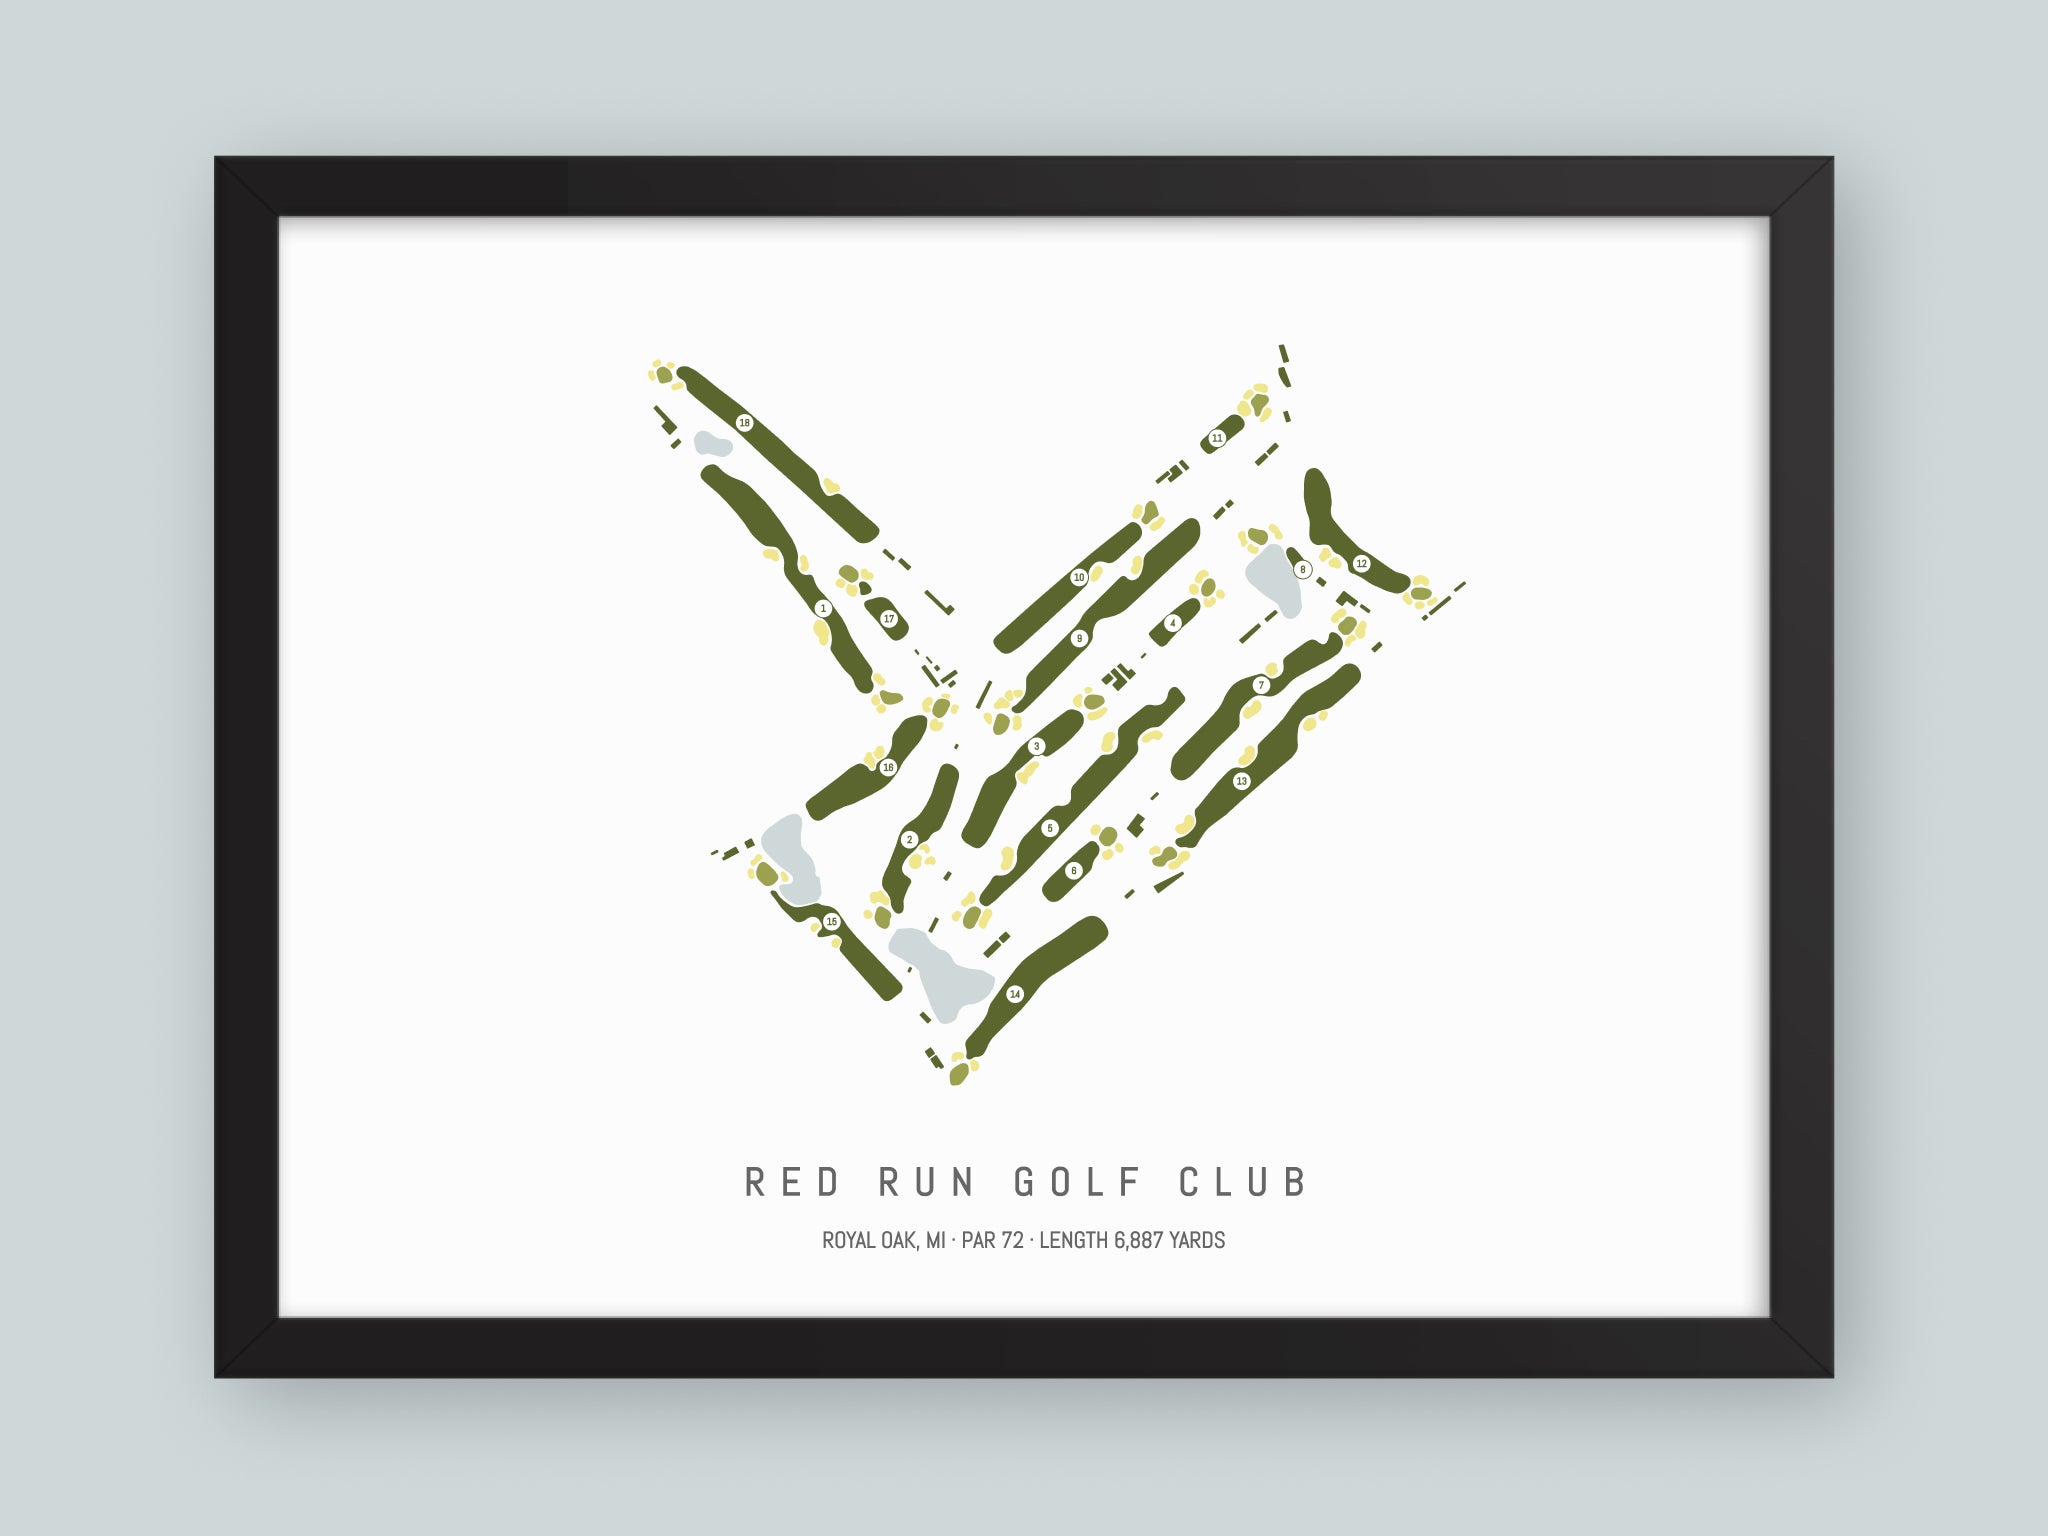 Red-Run-Golf-Club-MI--Black-Frame-24x18-With-Hole-Numbers